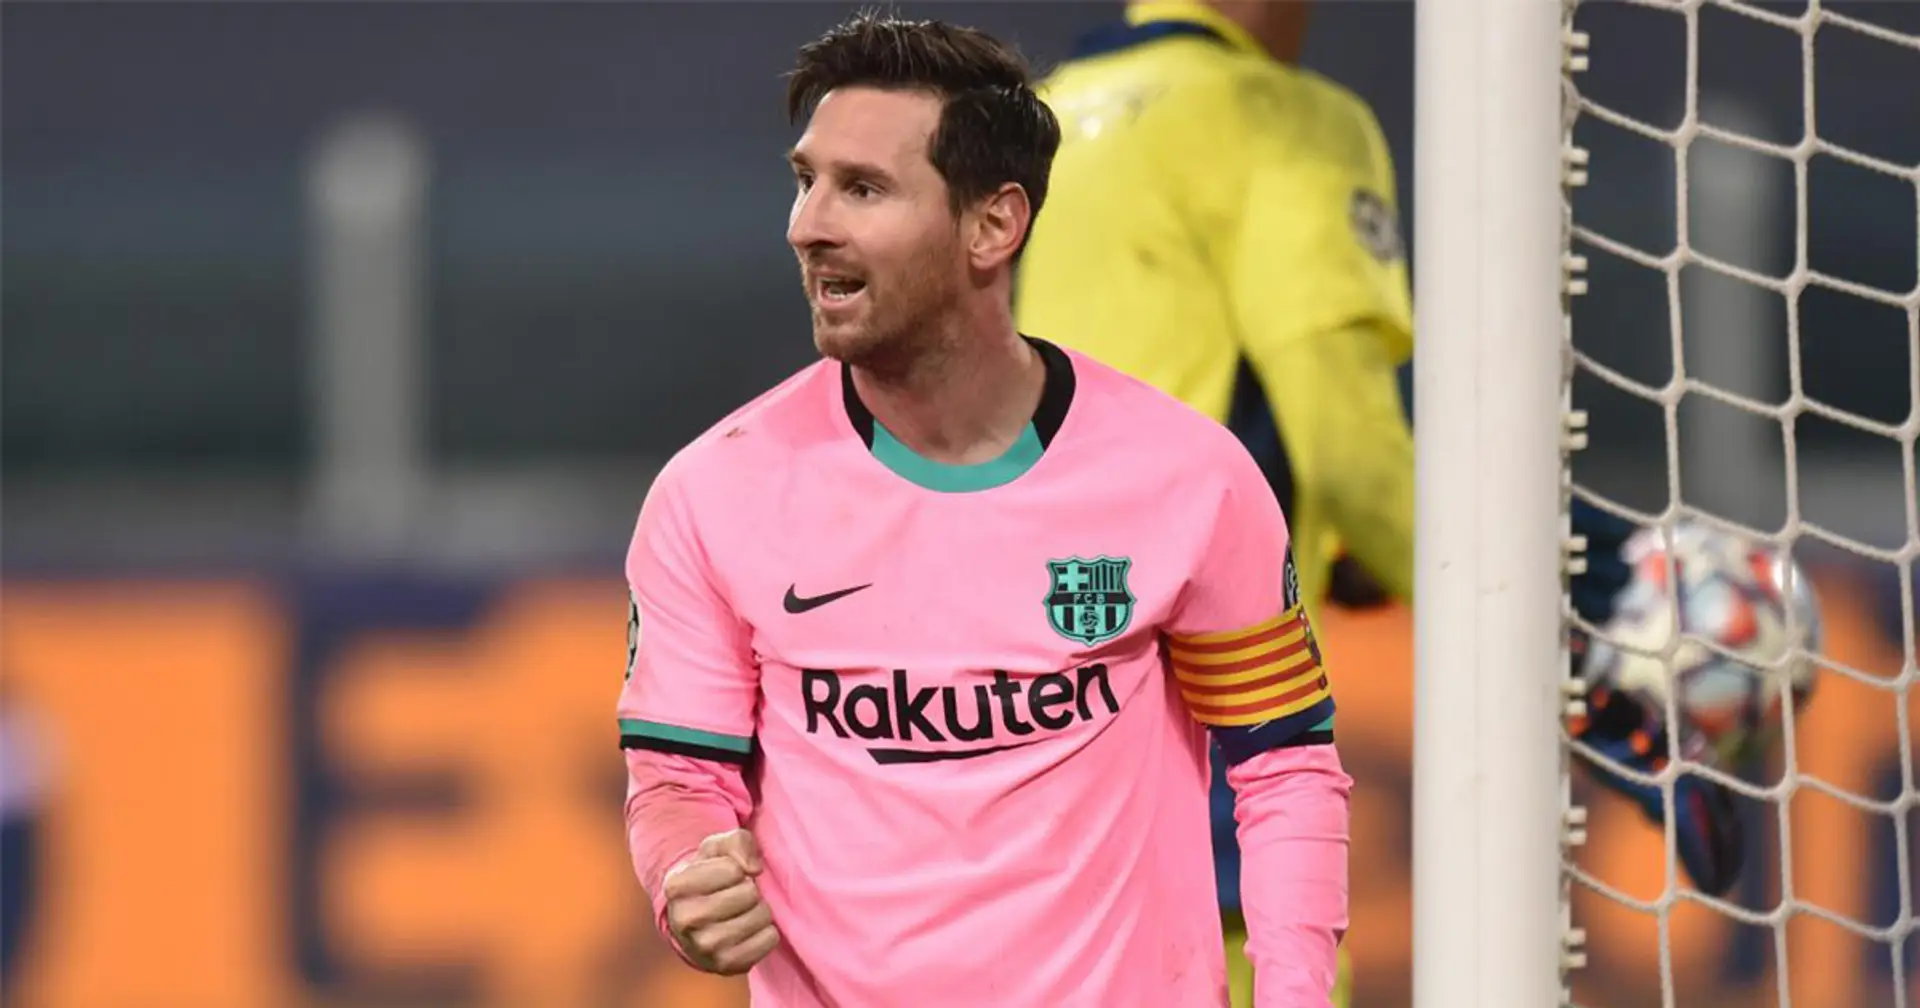 Still setting records: Messi records most successful dribbles in single game this season